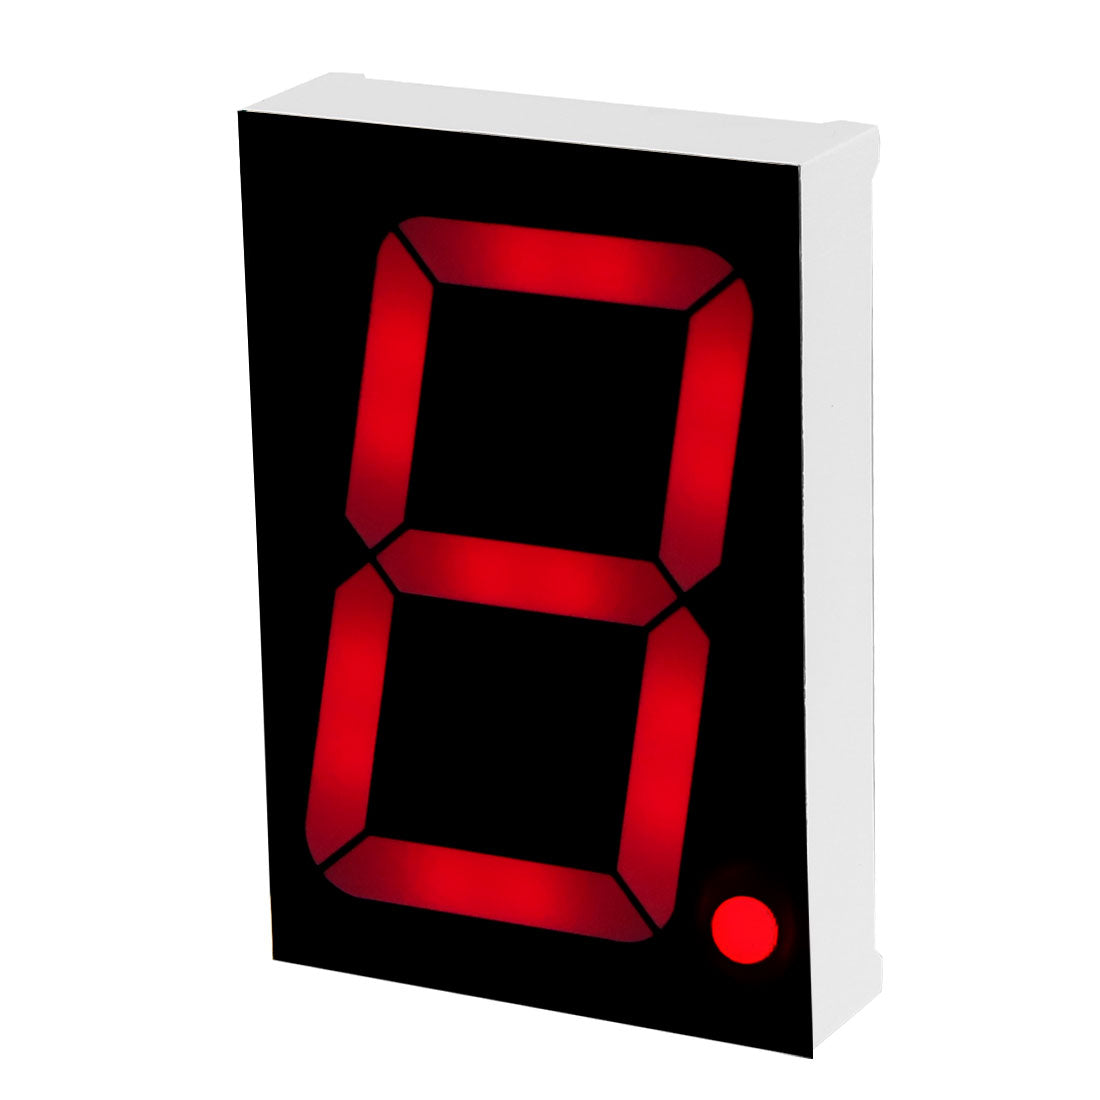 uxcell Uxcell Common Anode 10 Pin 1 Bit 7 Segment 2.2 x 1.5 x 0.43 Inch 1.8" Red LED Display Digital Tube